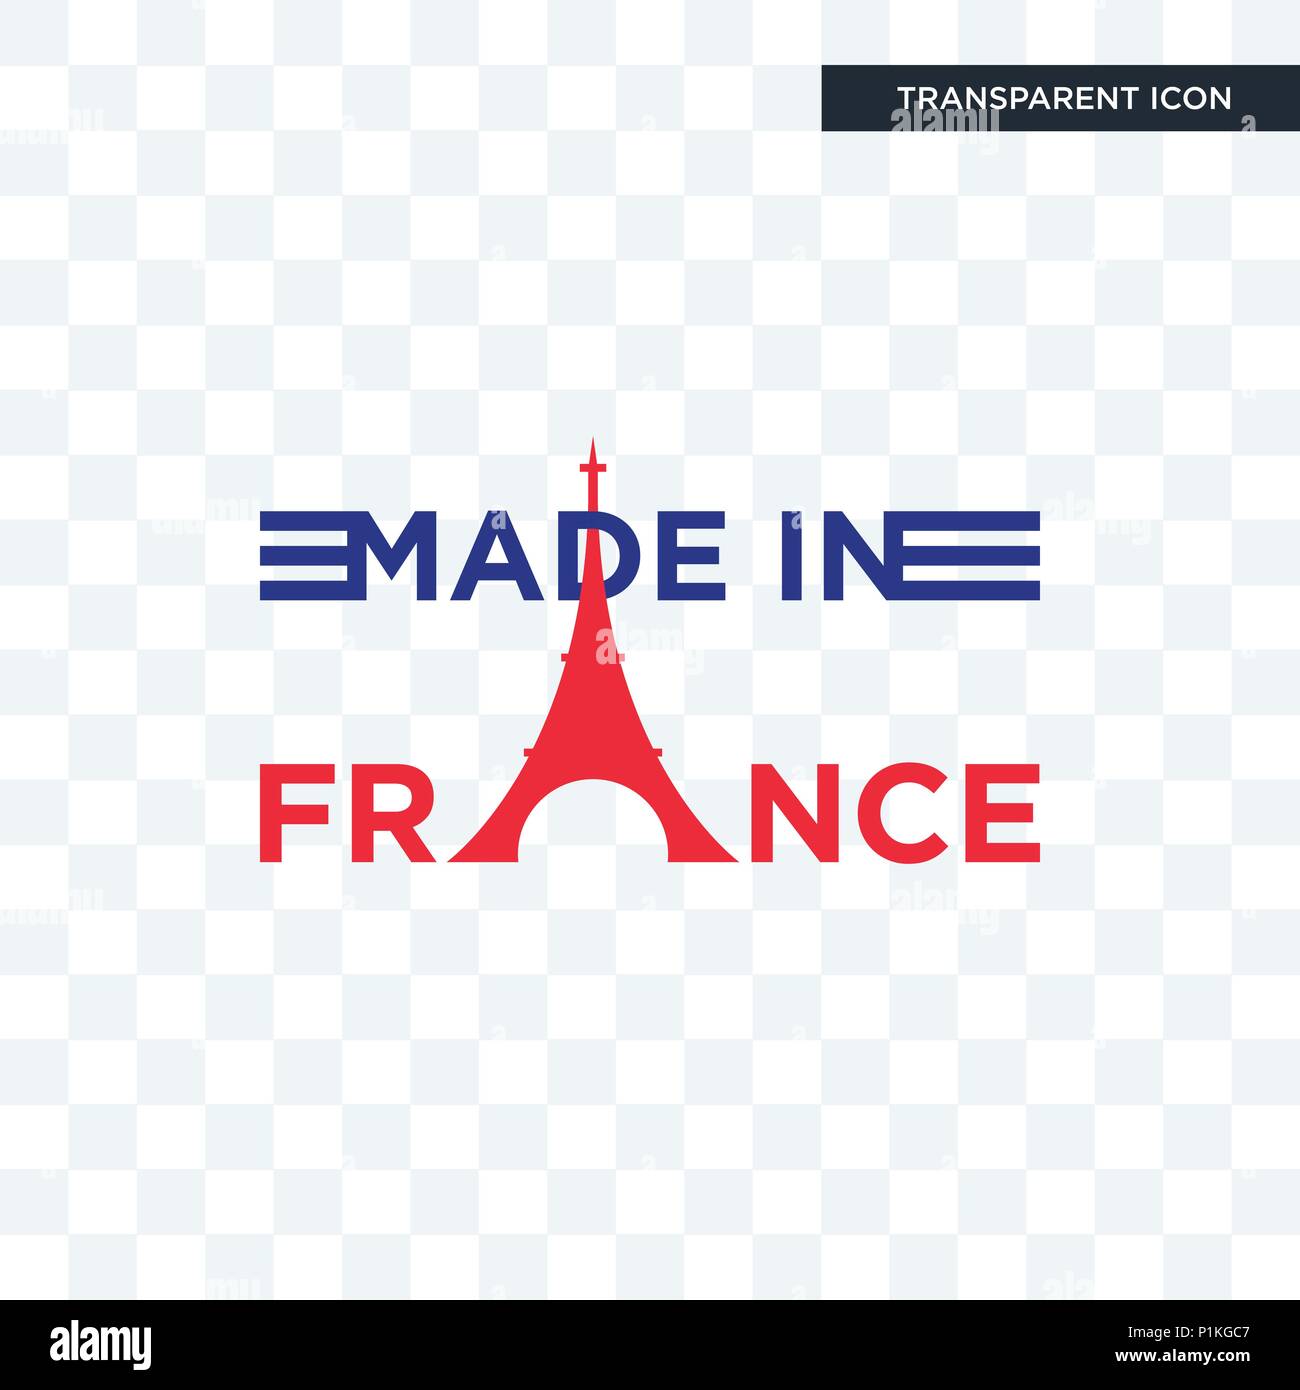 made in france vector icon isolated on transparent background